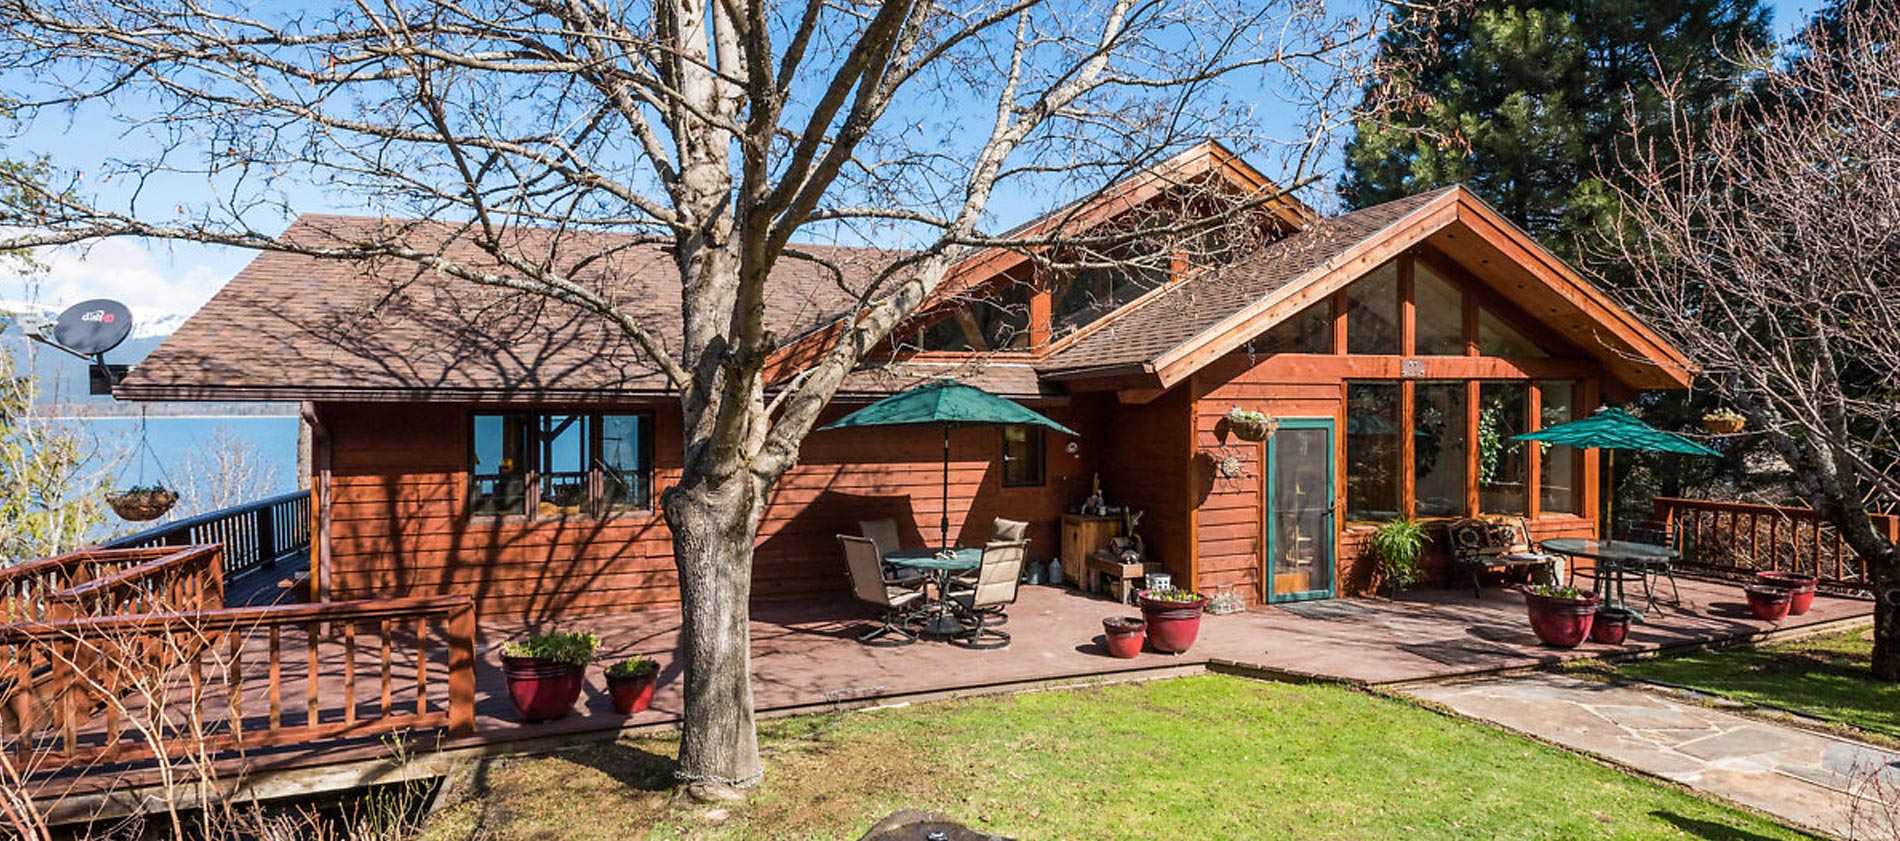 Redwood home tucked back in a quiet cove with 260+ feet of private Lake Pend Oreille frontage